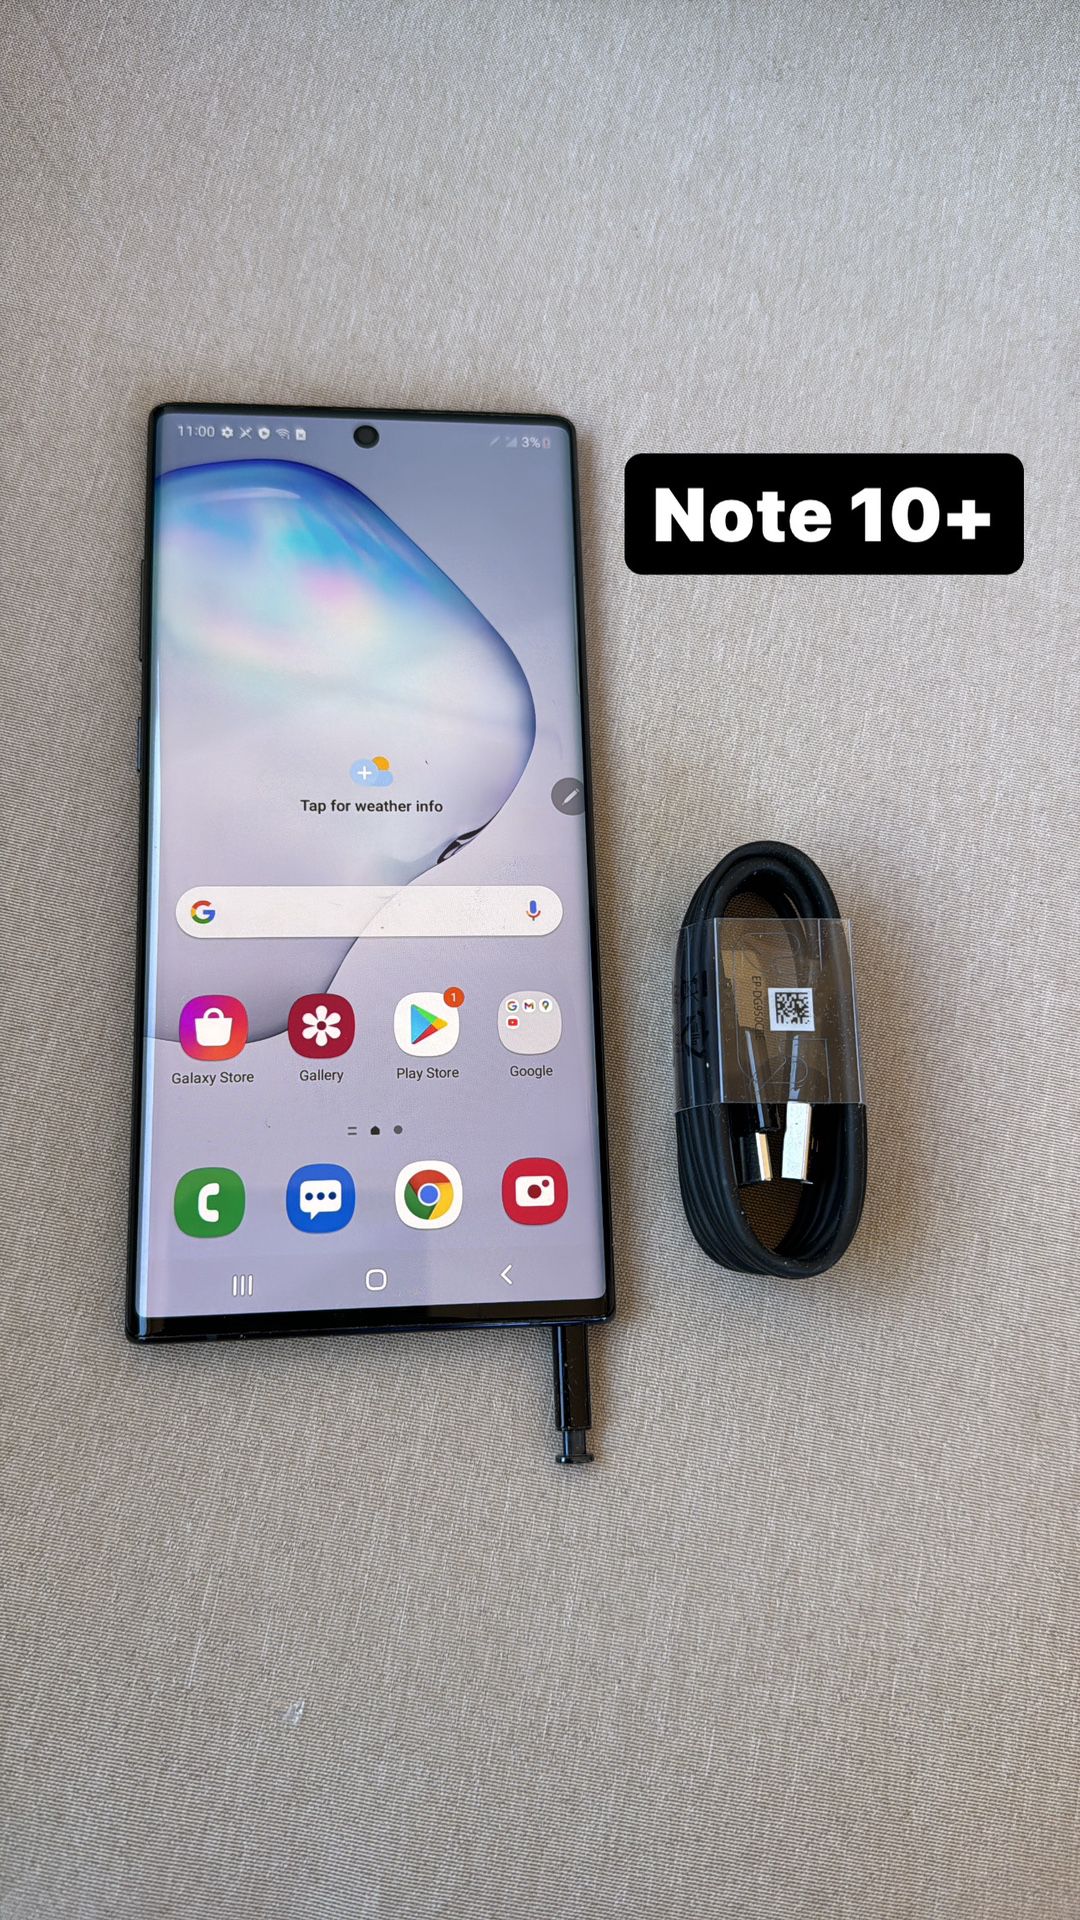 Samsung Note 10+ Plus 256gb. Like New And Unlocked! -No tax 